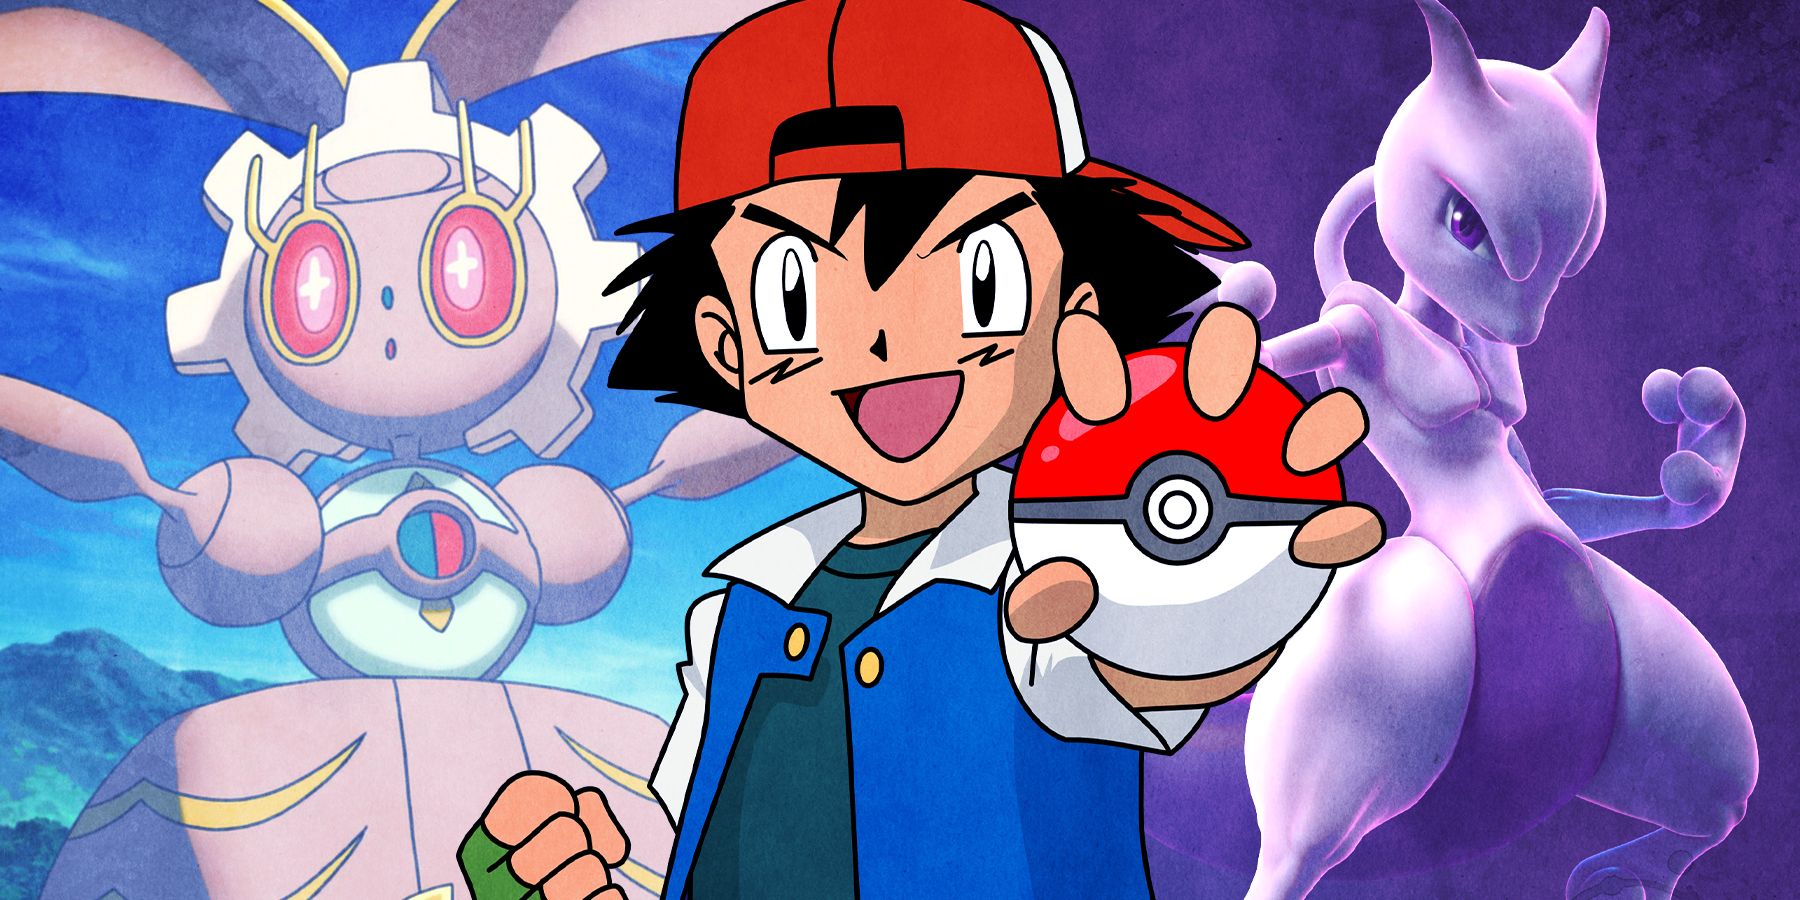 Does Ash catch any legendary or mythical Pokemon? - Quora